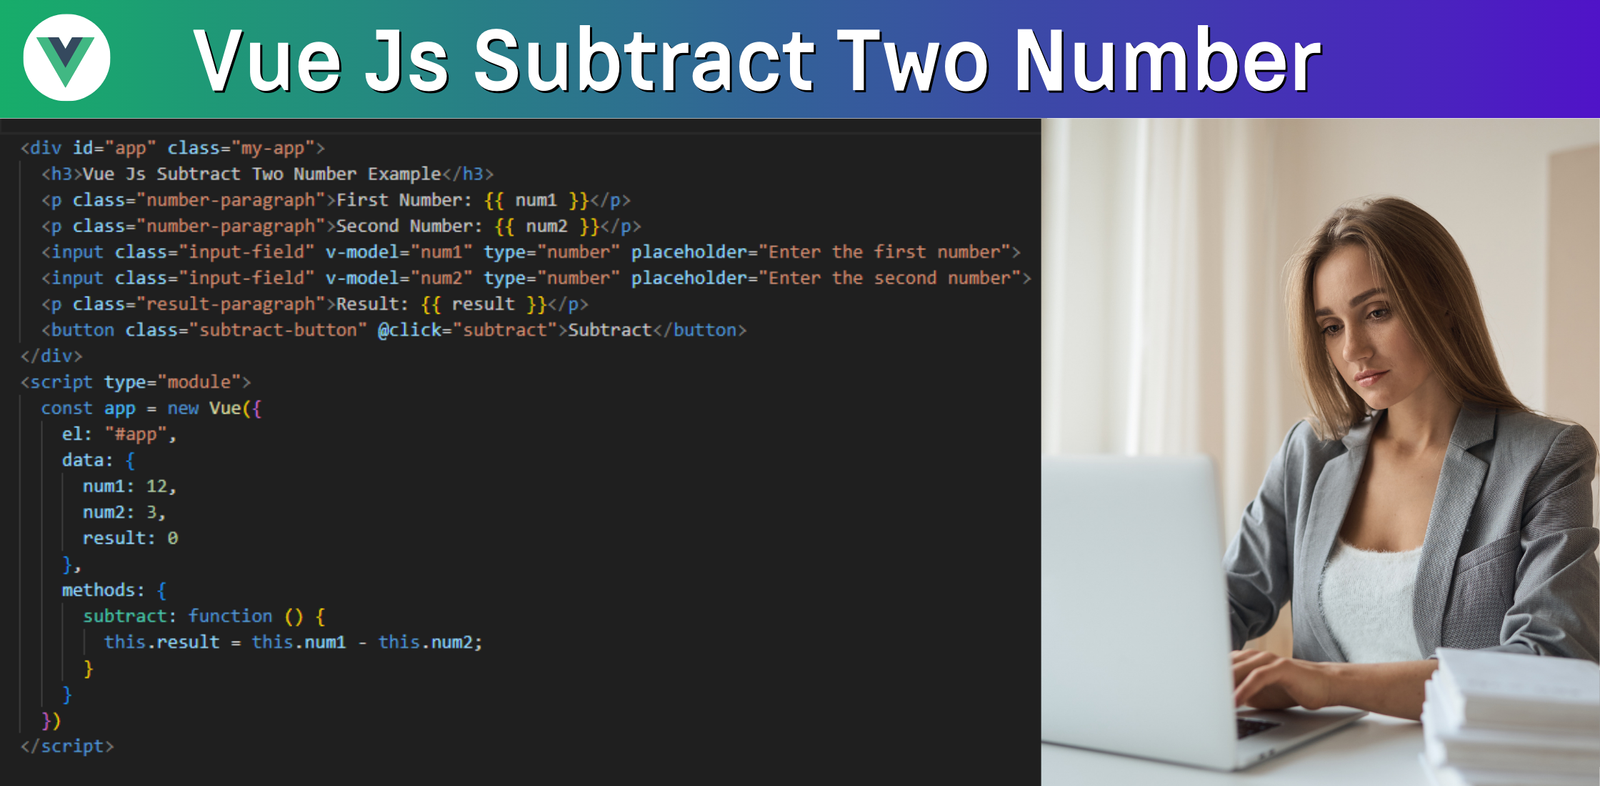 Vue Js Subtract Two Number